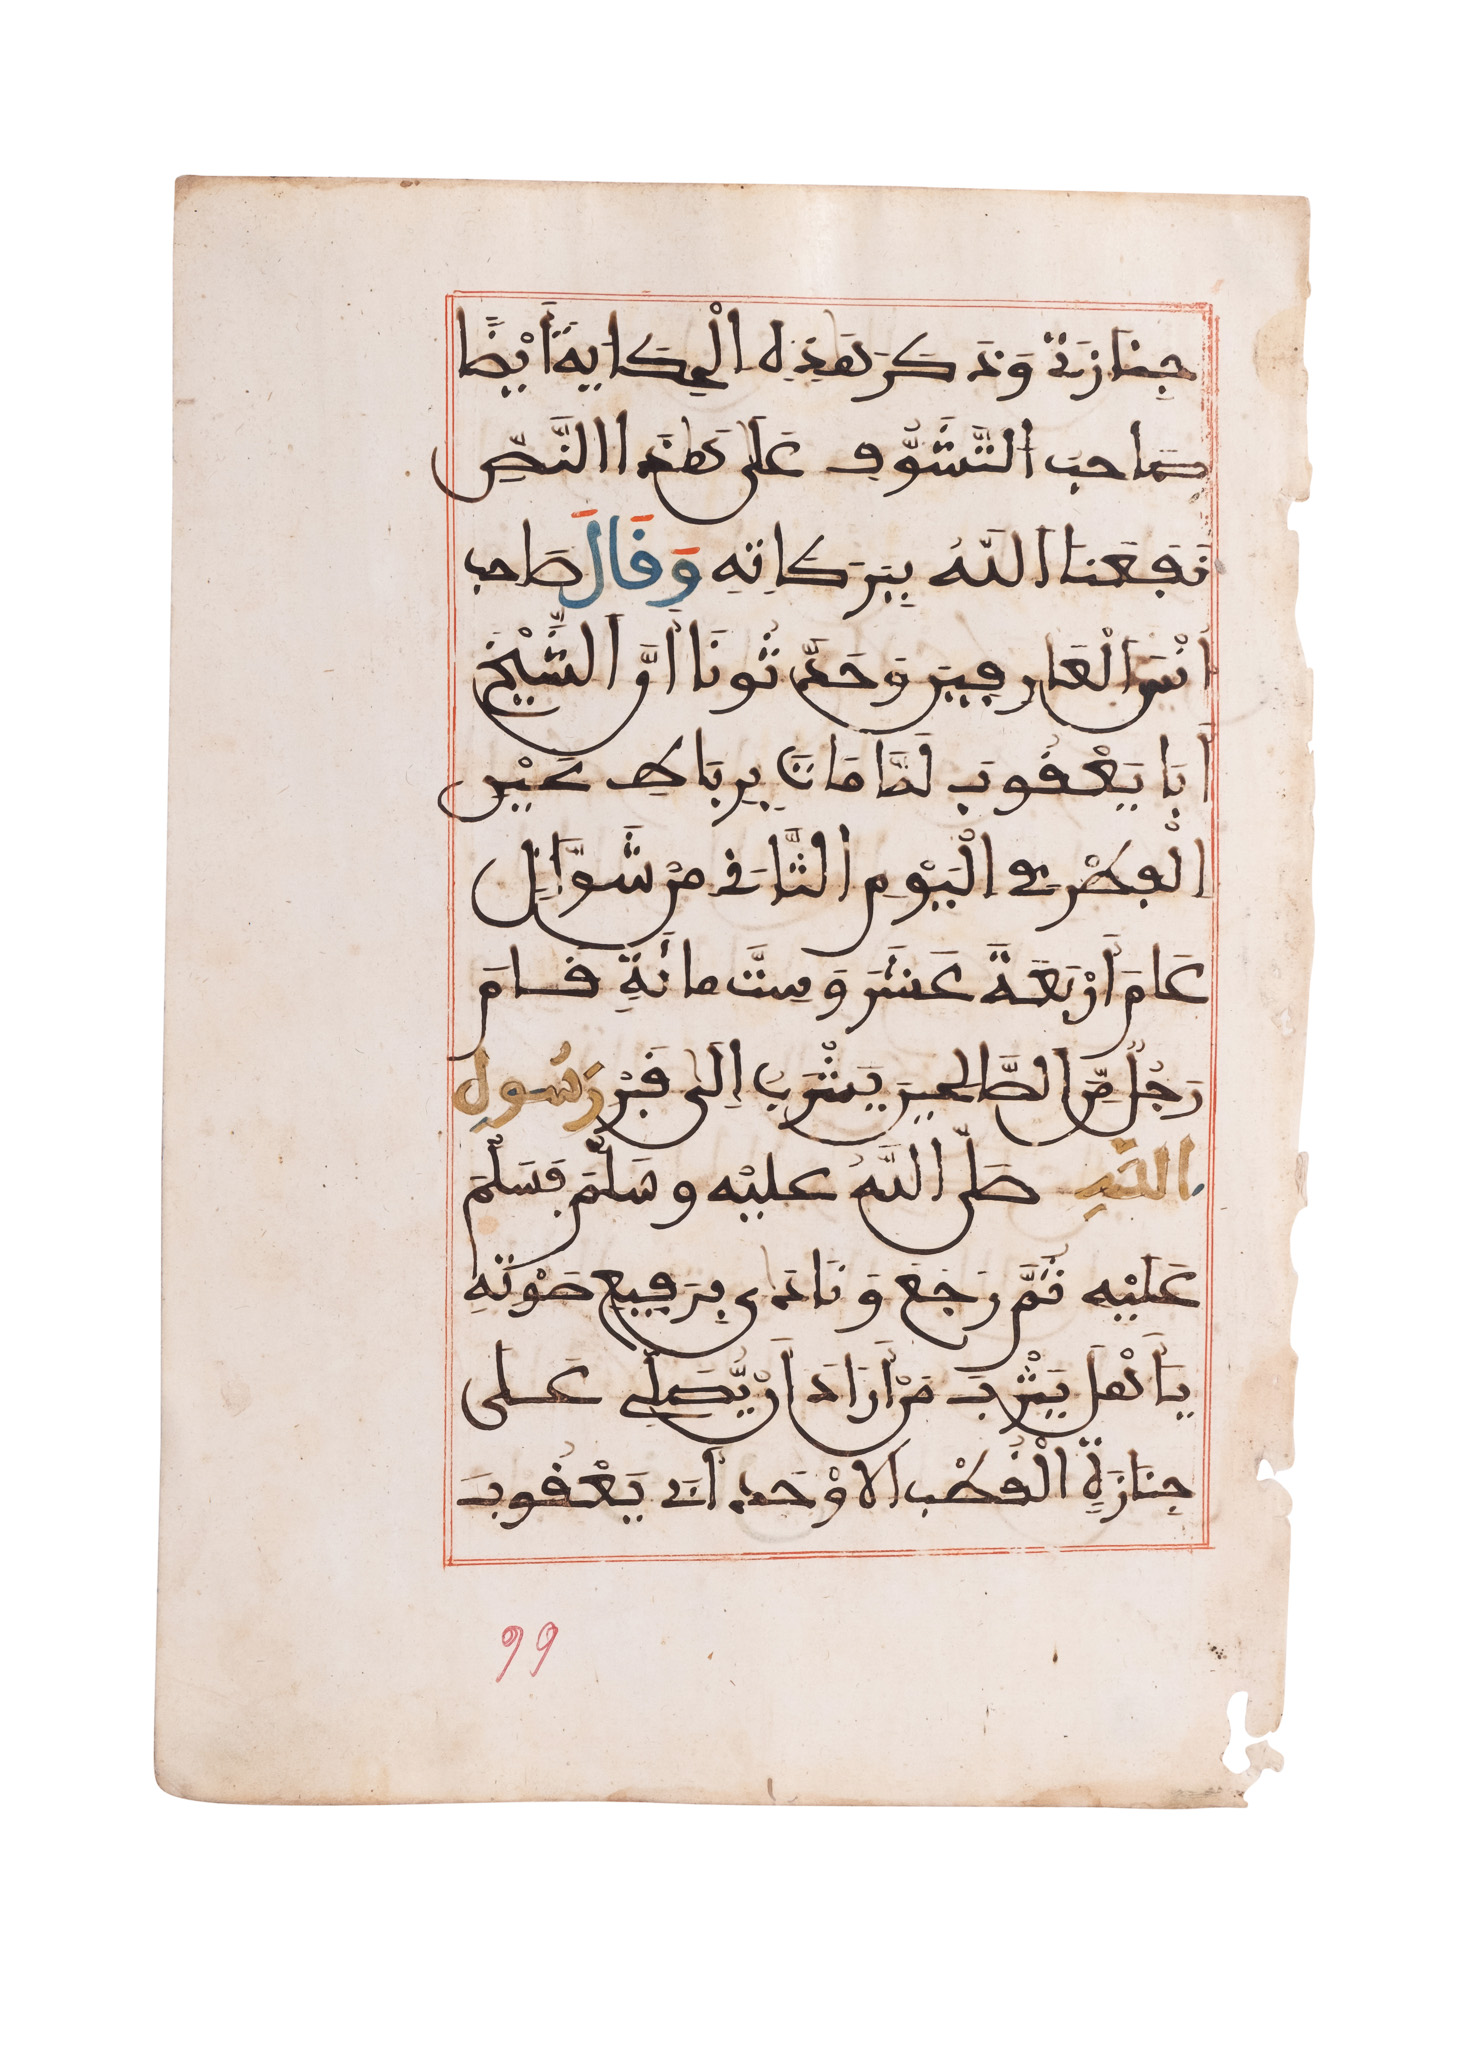 A BIFOLIO FROM AN ISLAMIC BOOK ON MAGHRIBI SCRIPT, NORTHERN AFRICA OR SPAIN, 18TH CENTURY